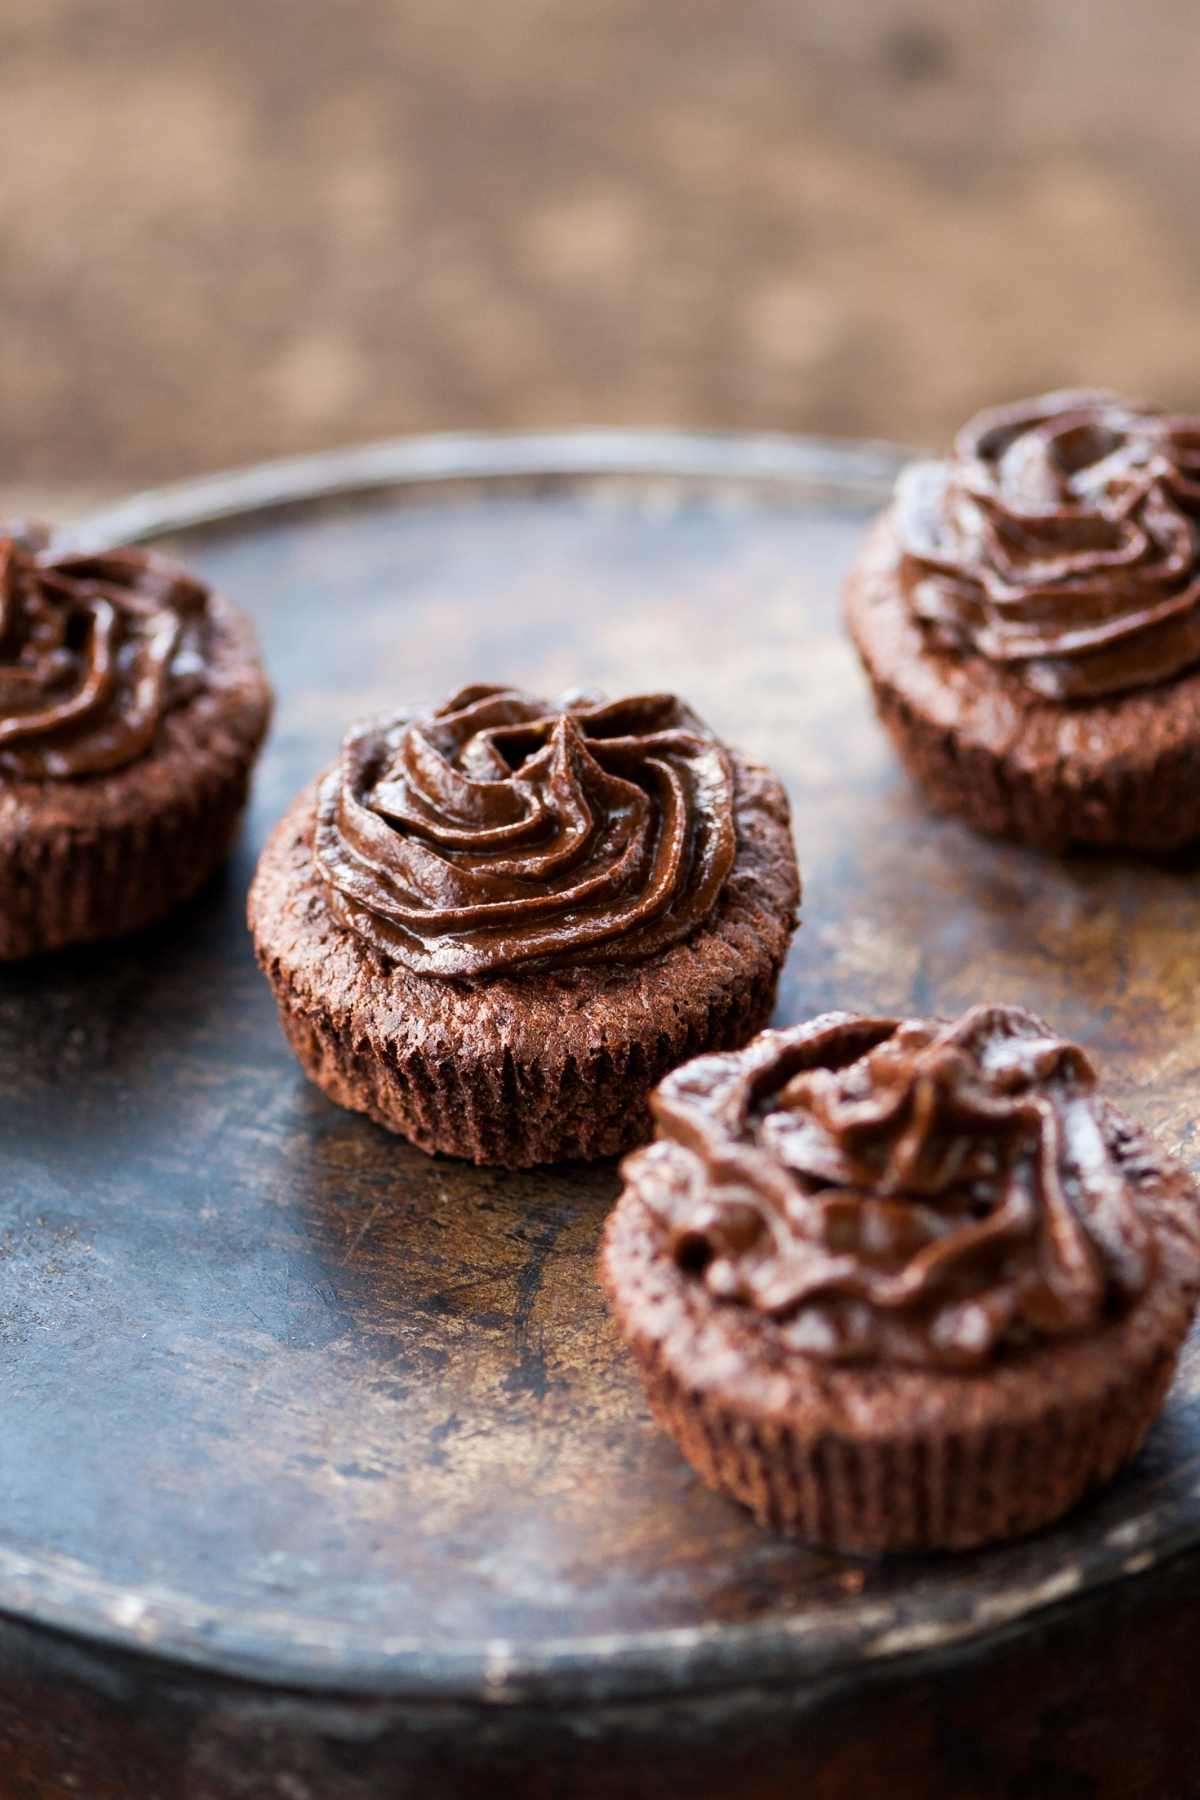 If you’ve run out of powdered sugar and need to make chocolate frosting, this recipe is the answer. It’s made with regular granulated sugar and comes out perfectly light and smooth.